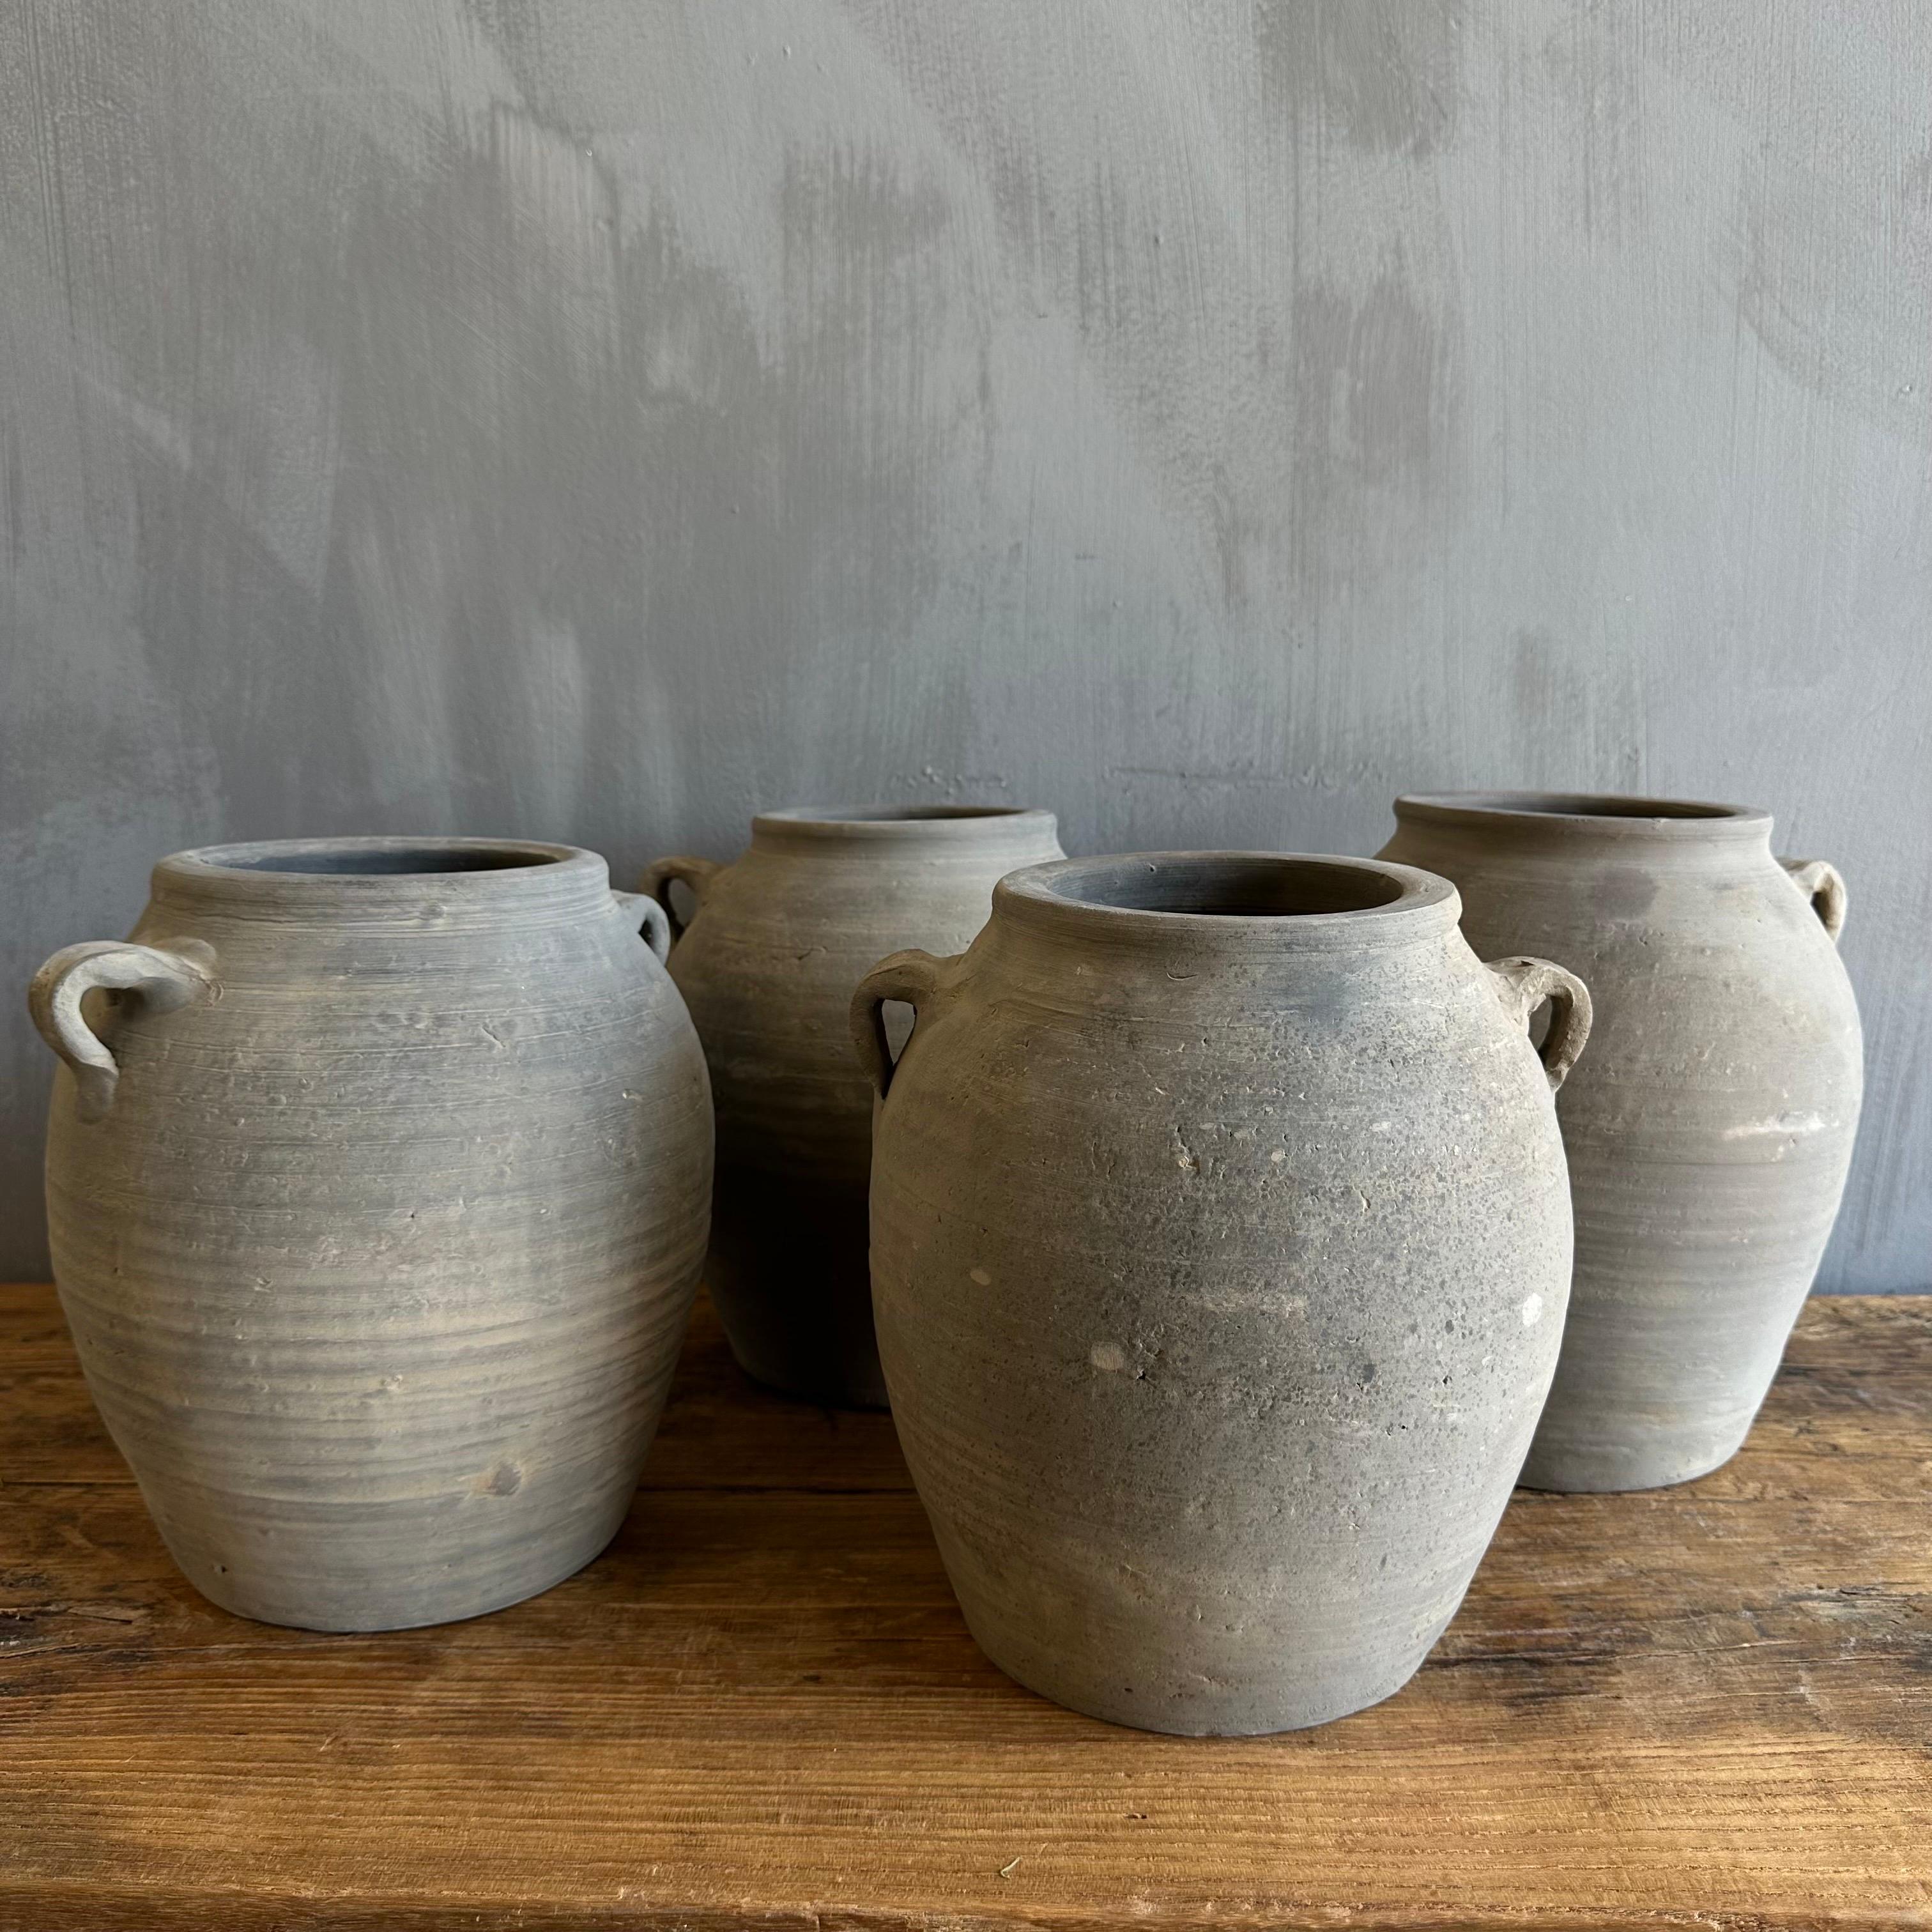 Beautiful weathered grey vintage clay pot that is beautifully colored and authentically worn. 
The surface of the pot and handle are peeling in places, revealing the original clay below. These qualities give the pot a lived-in appearance and will